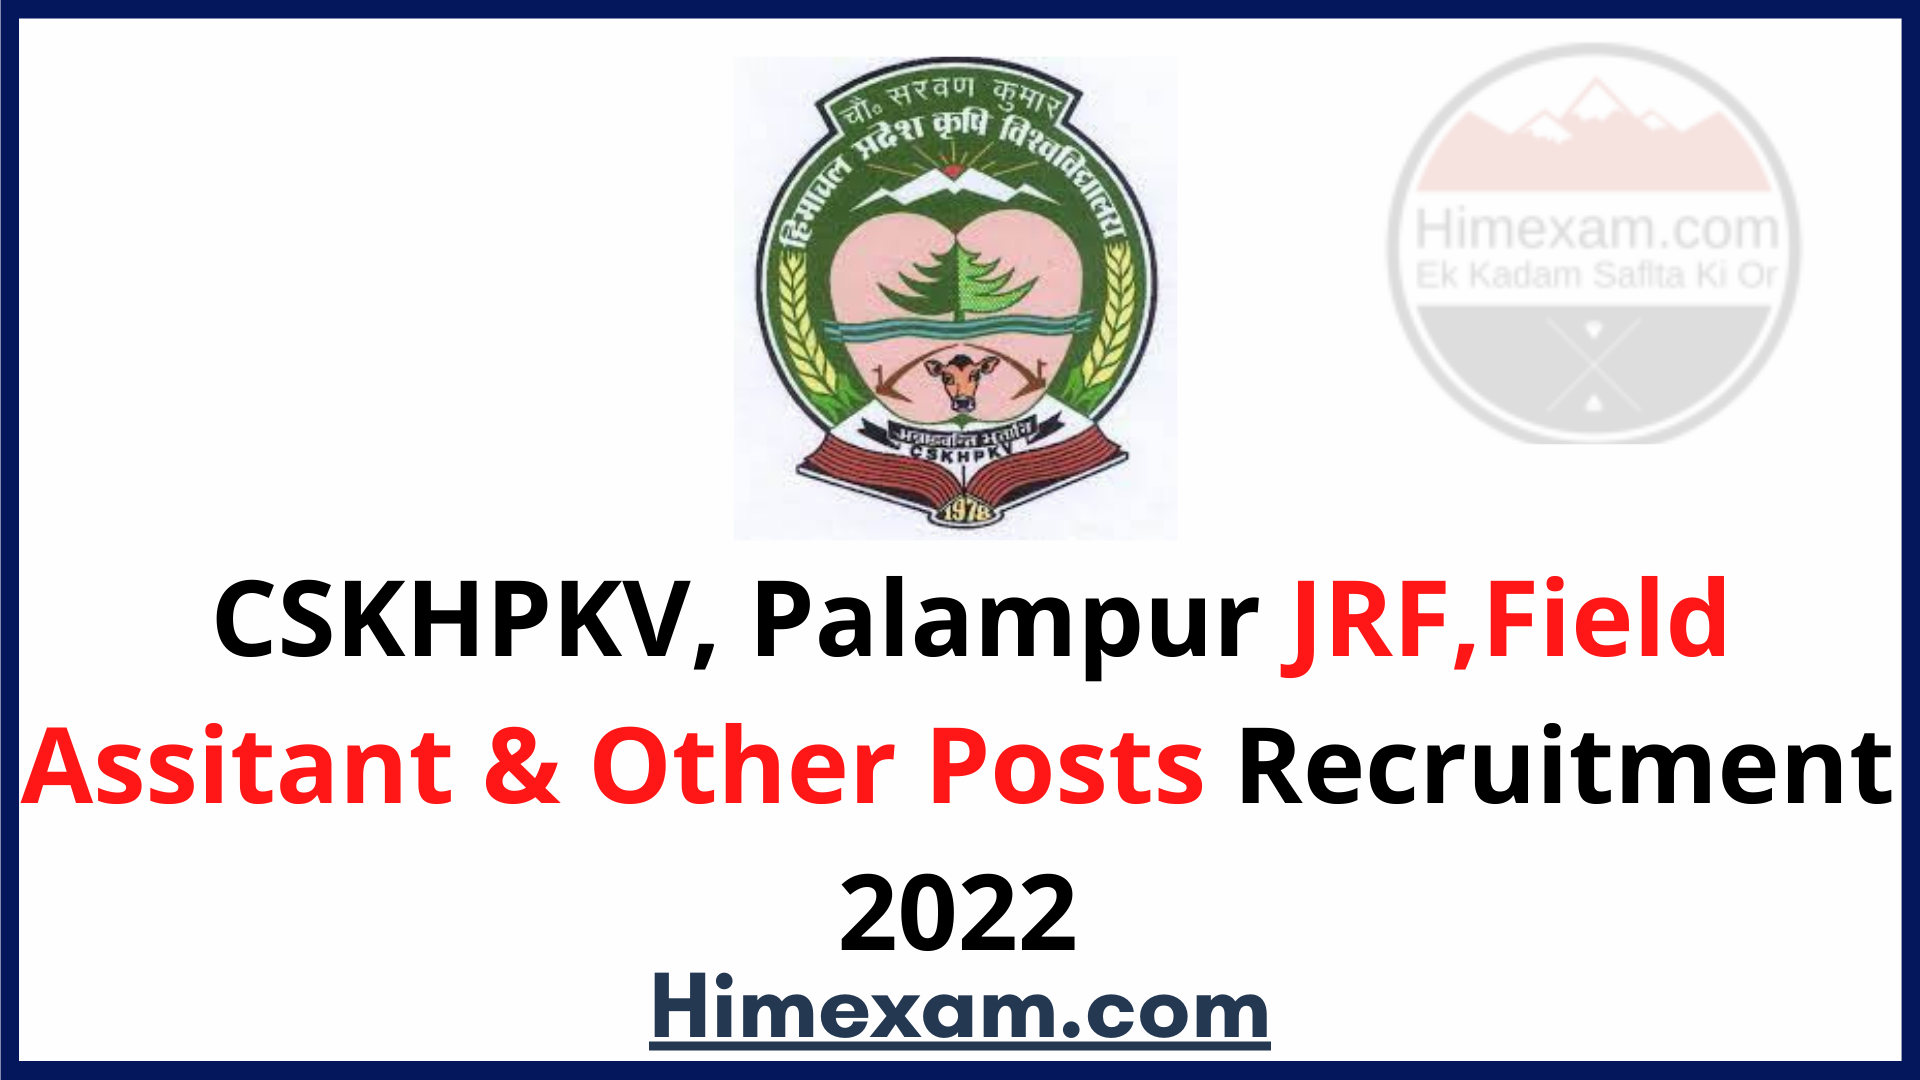 CSKHPKV, Palampur JRF,Field Assitant & Other Posts Recruitment 2022